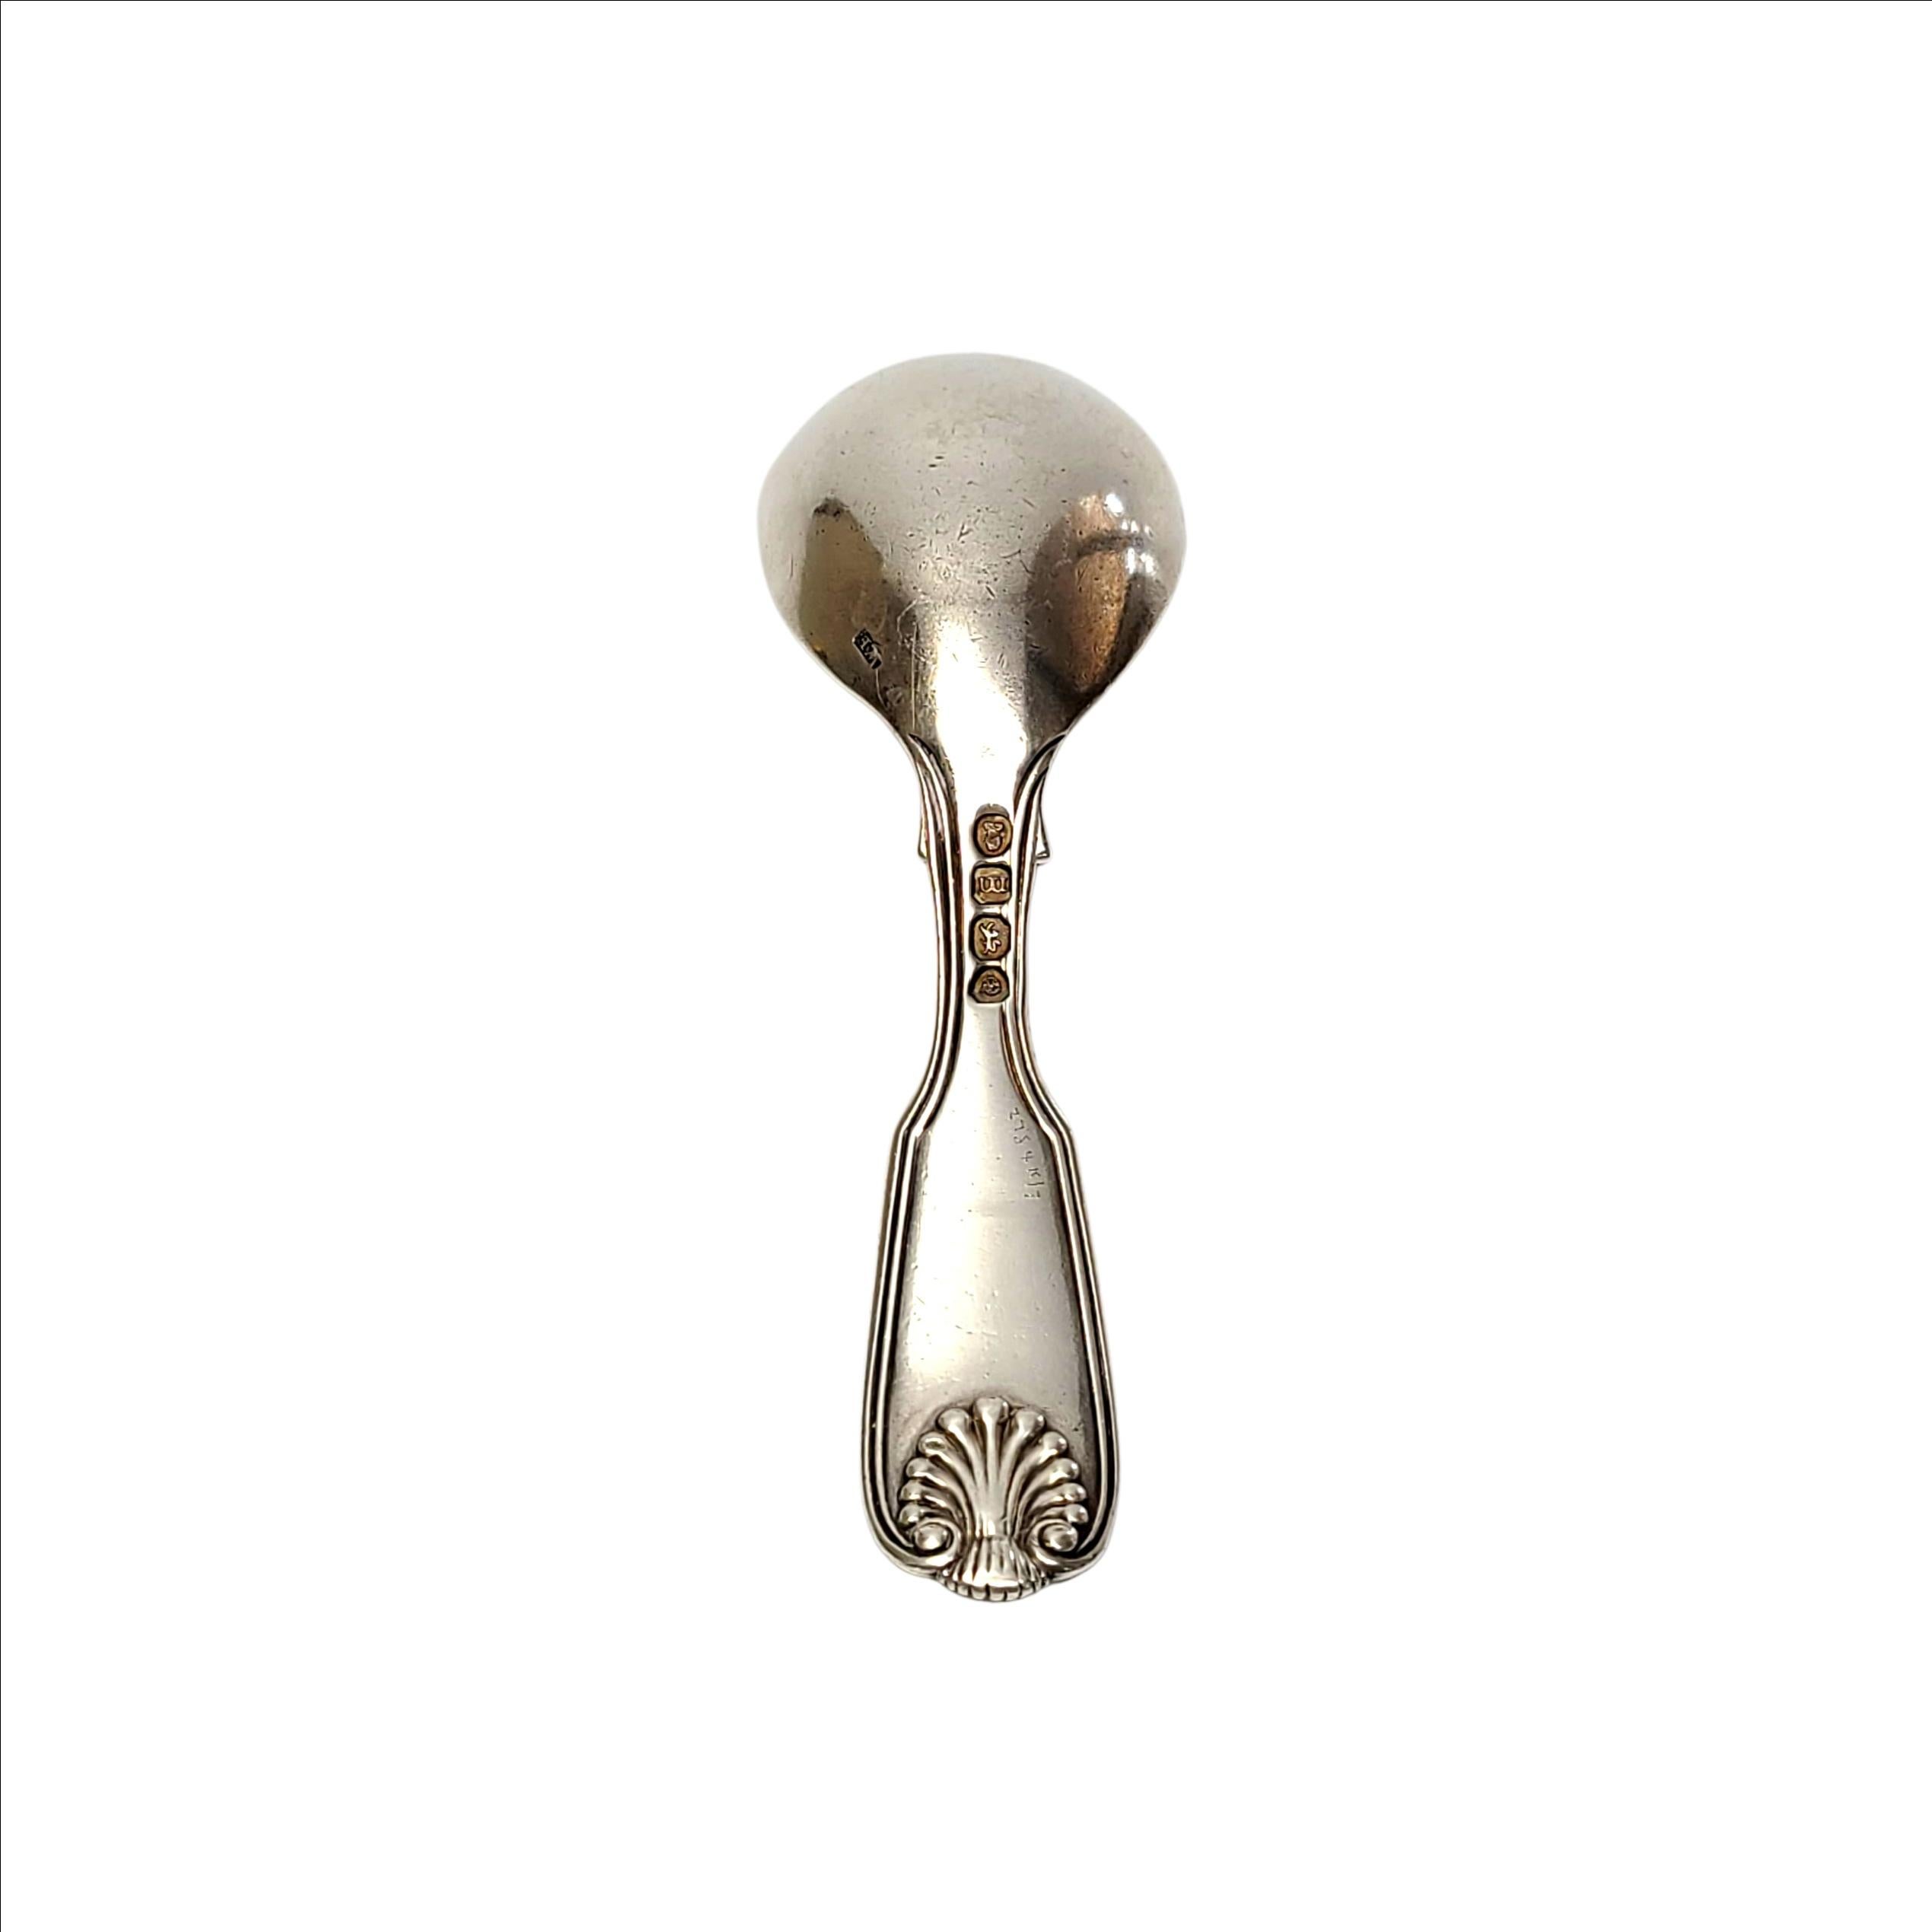 Sterling silver baby spoon by William Eaton of London, c.1827.

No monogram

Small spoon with a simple and timeless shell design of the Georgian Era.

Measures 4 3/8